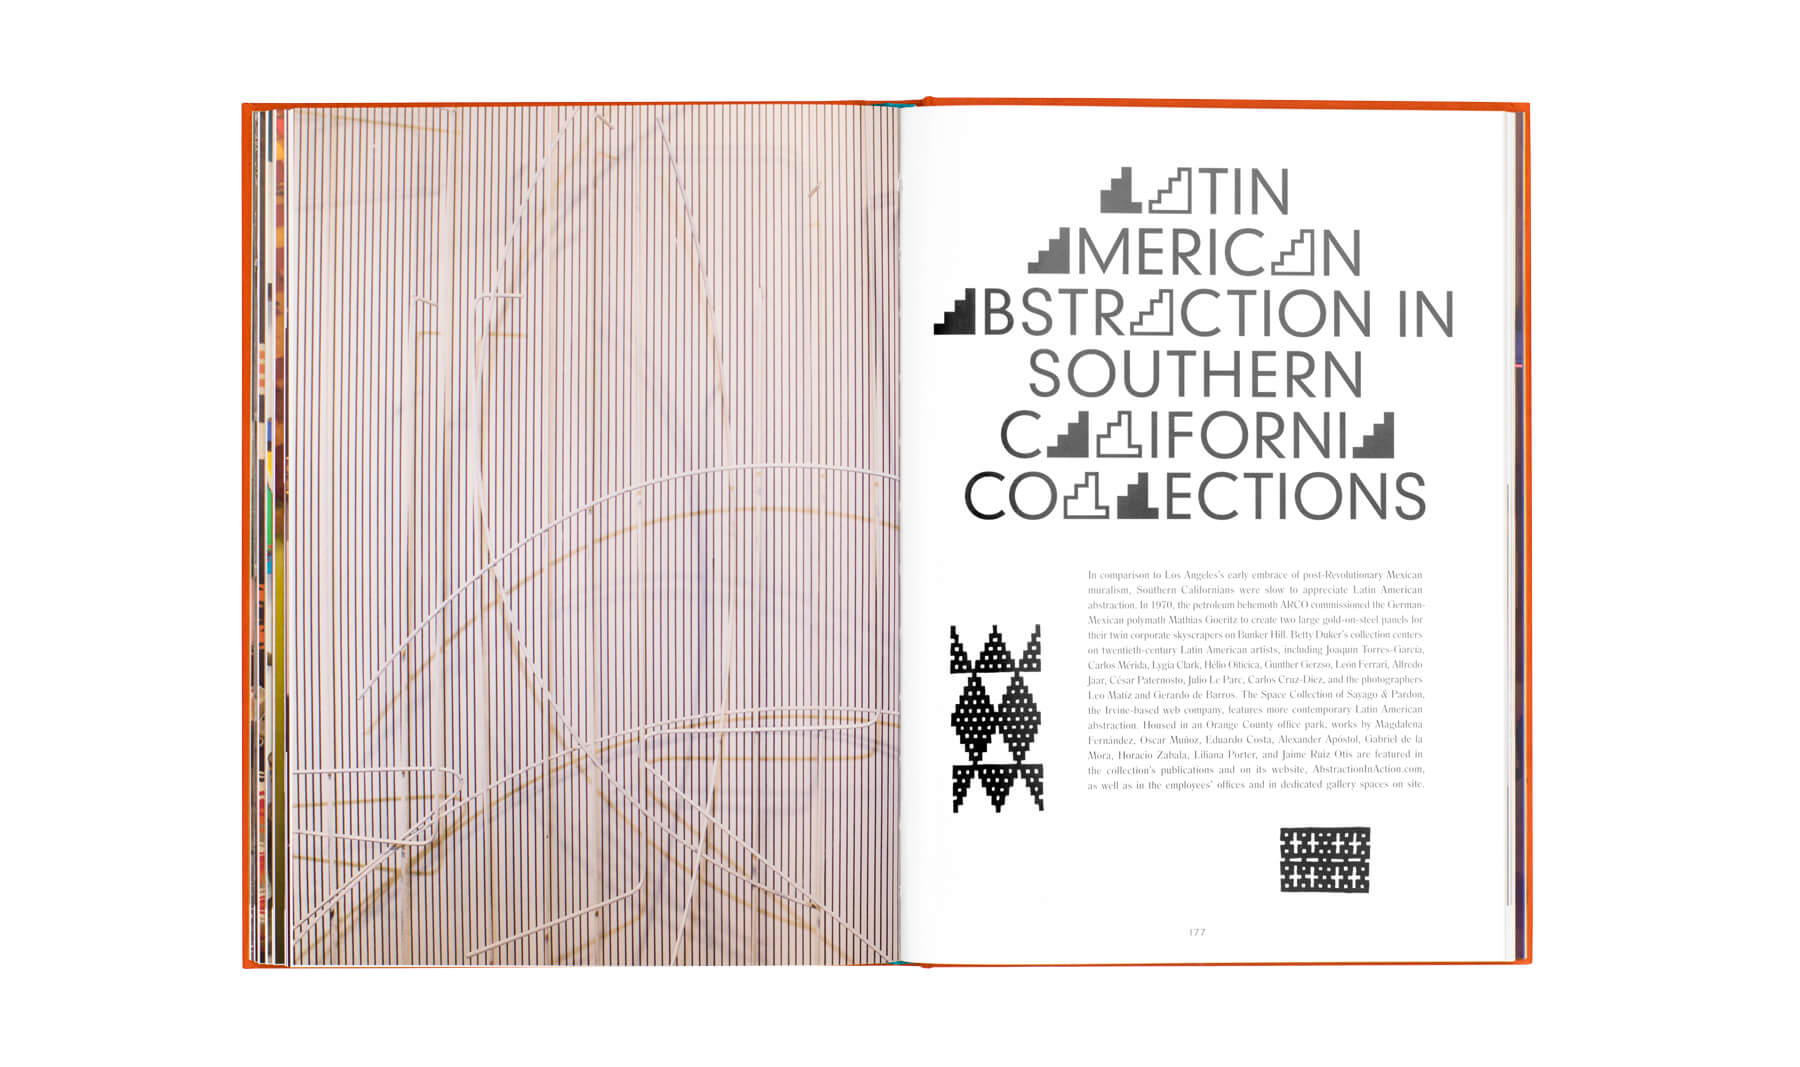 Product image of L.A. collects L.A. – Latin America in Southern California Collections